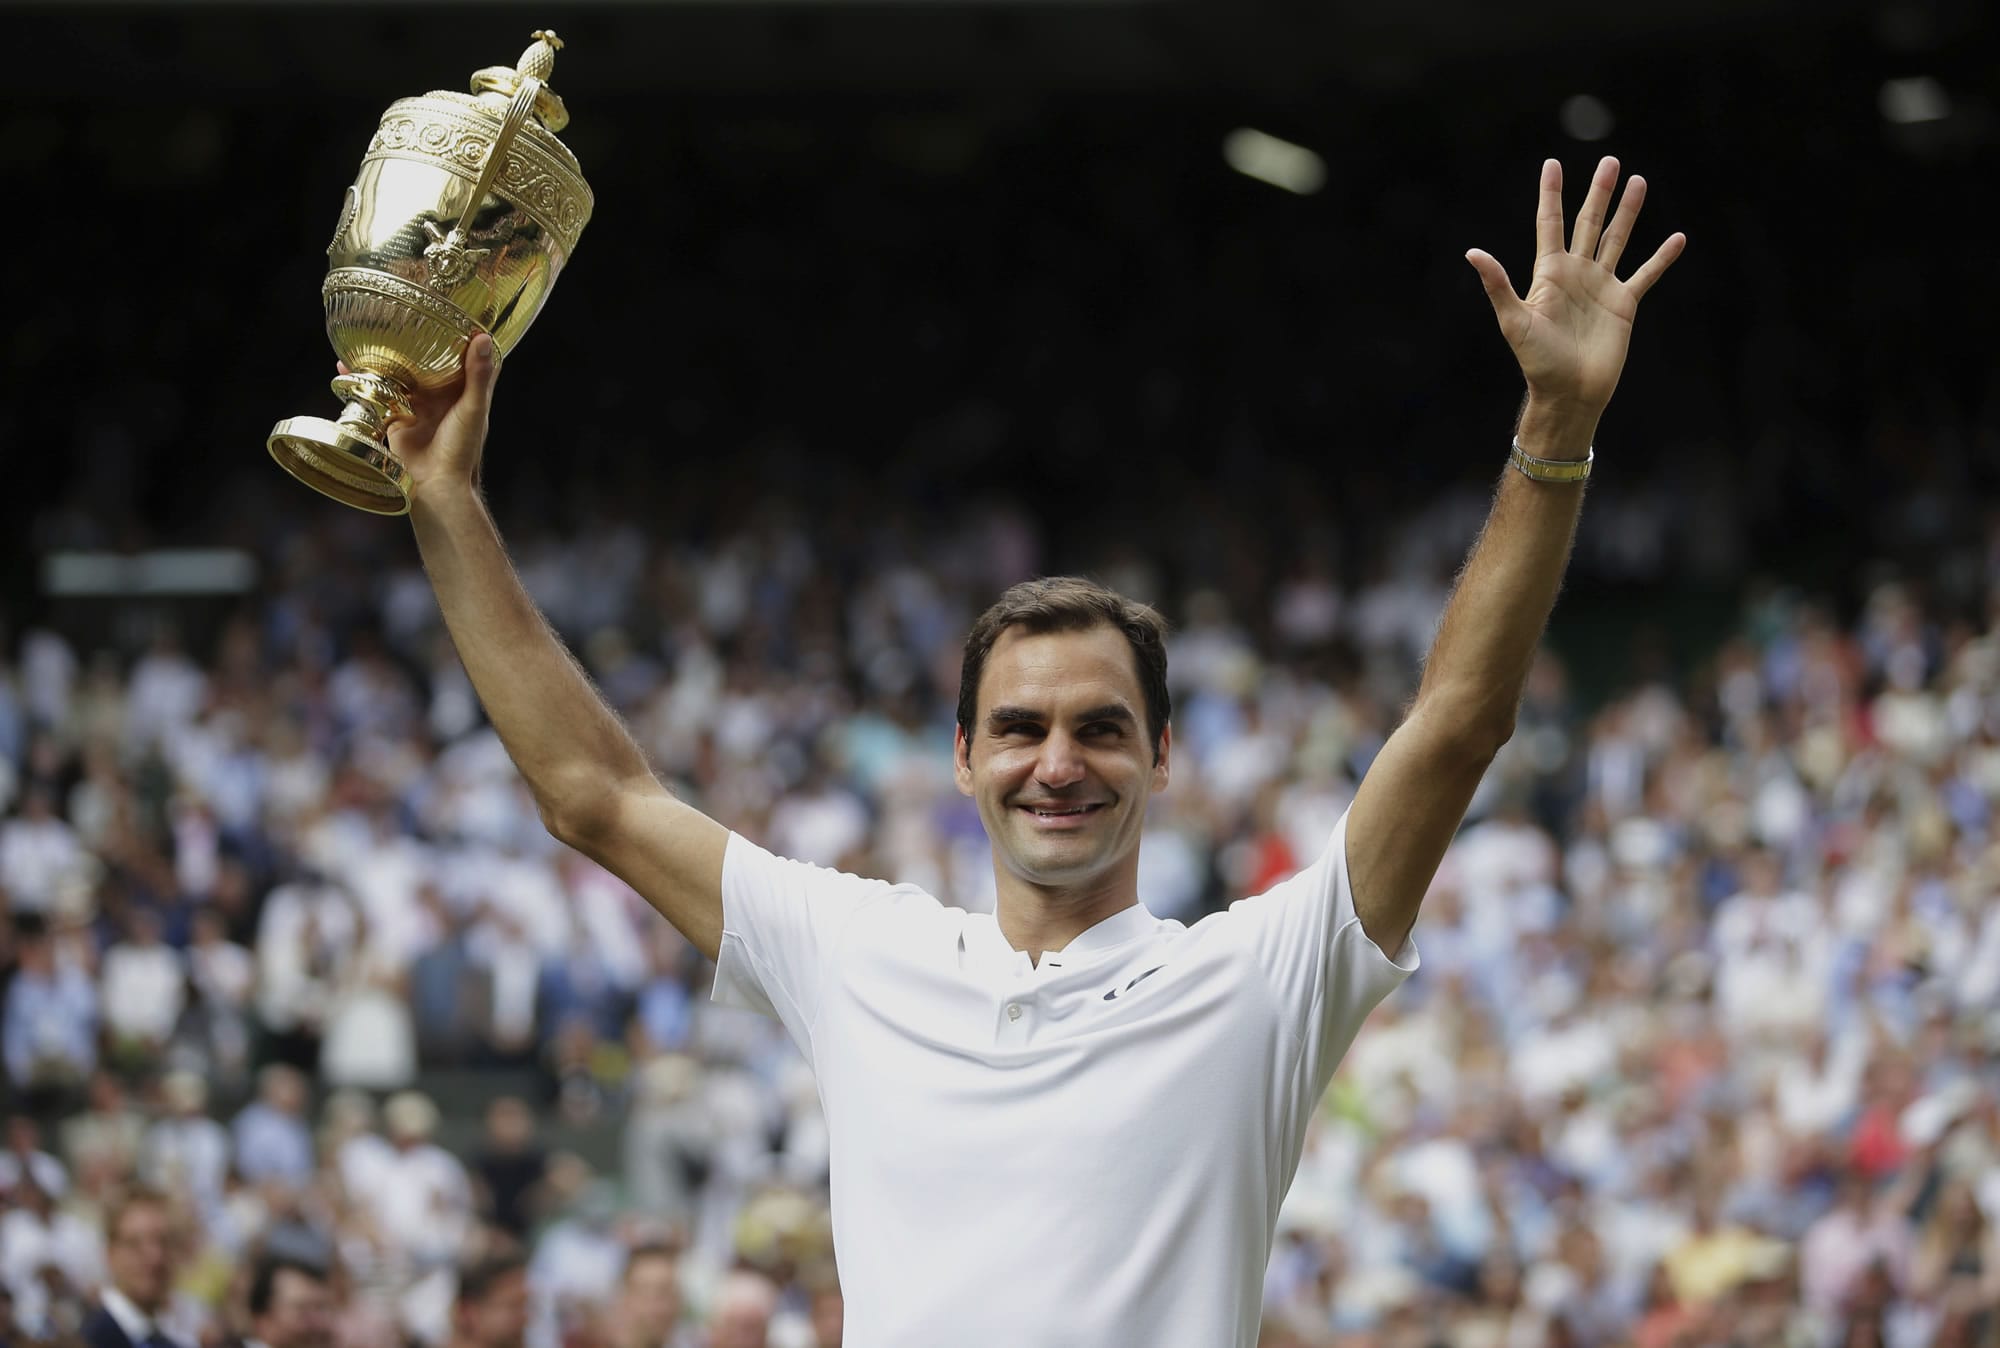 Switzerland's Roger Federer celebrates with the trophy after beating Croatia's Marin Cilic in the Men's Singles final match on day thirteen at the Wimbledon Tennis Championships in London Sunday, July 16, 2017.